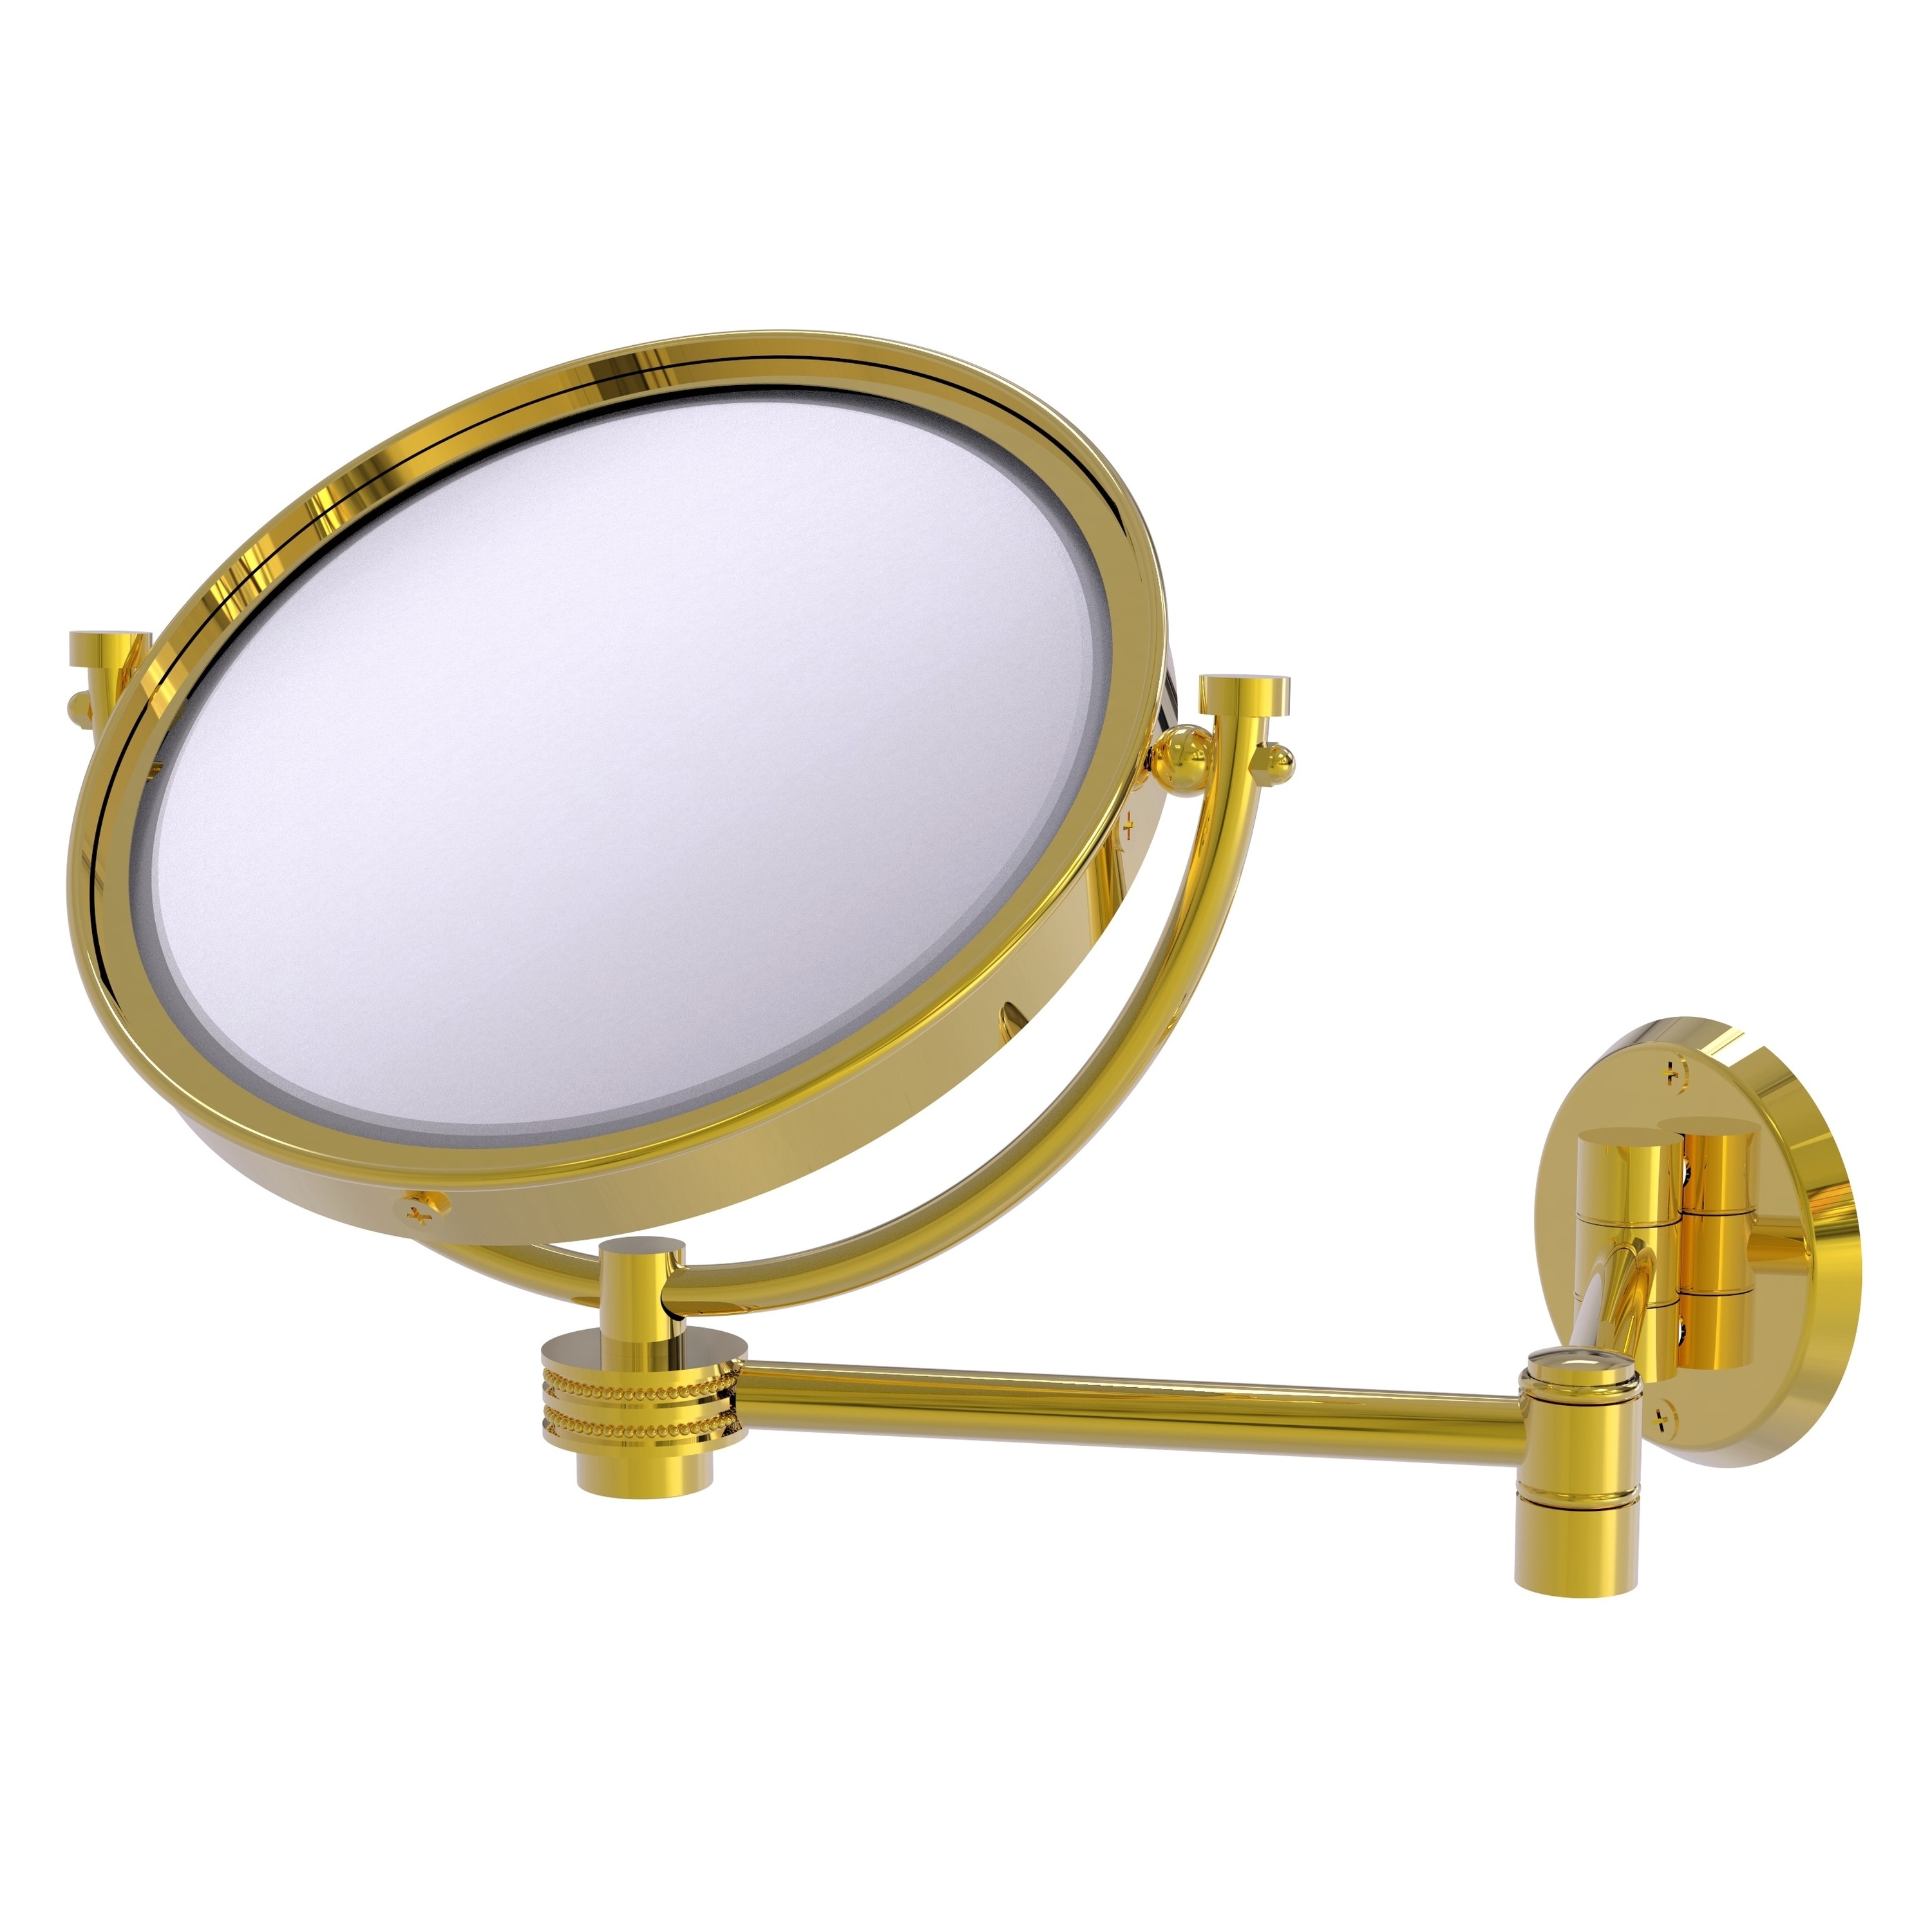 8-in x 10-in Polished Silver Double-sided 3X Magnifying Wall-mounted Vanity Mirror | - Allied Brass WM-6D/3X-PB